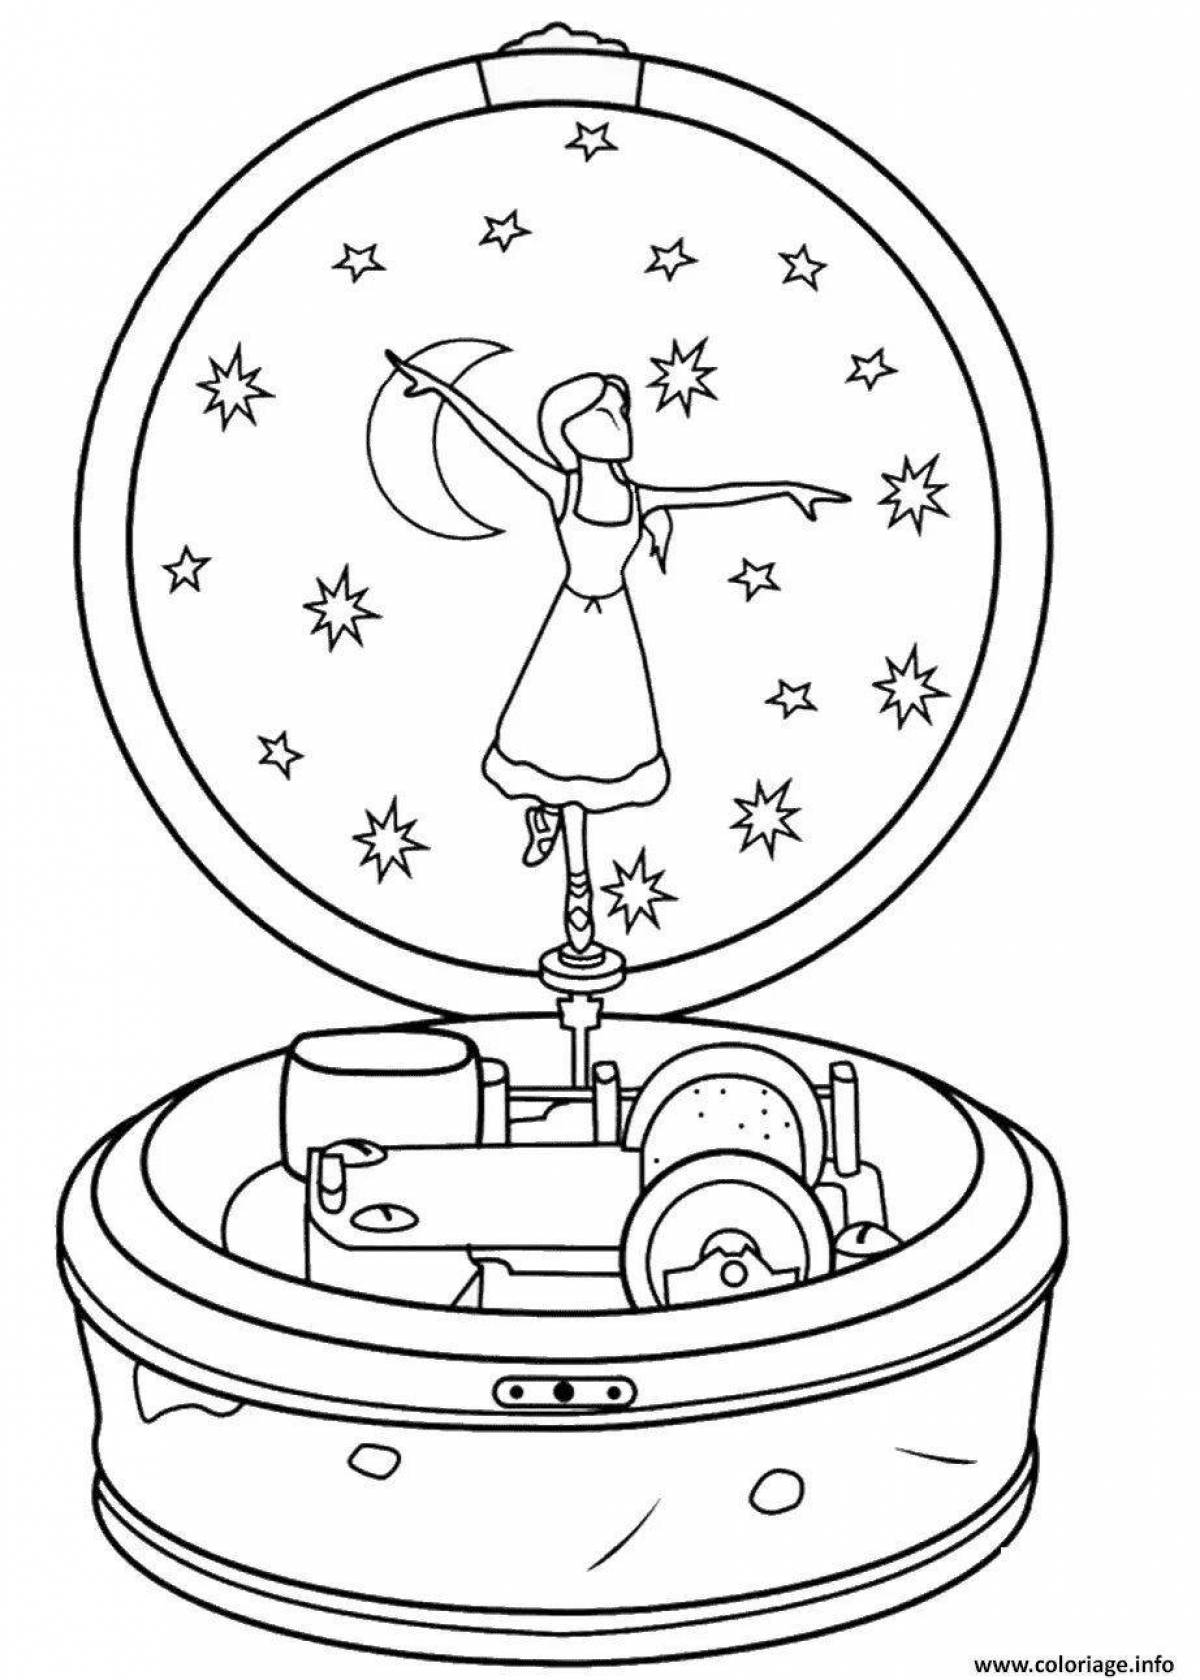 Colored hurdy-gurdy coloring page